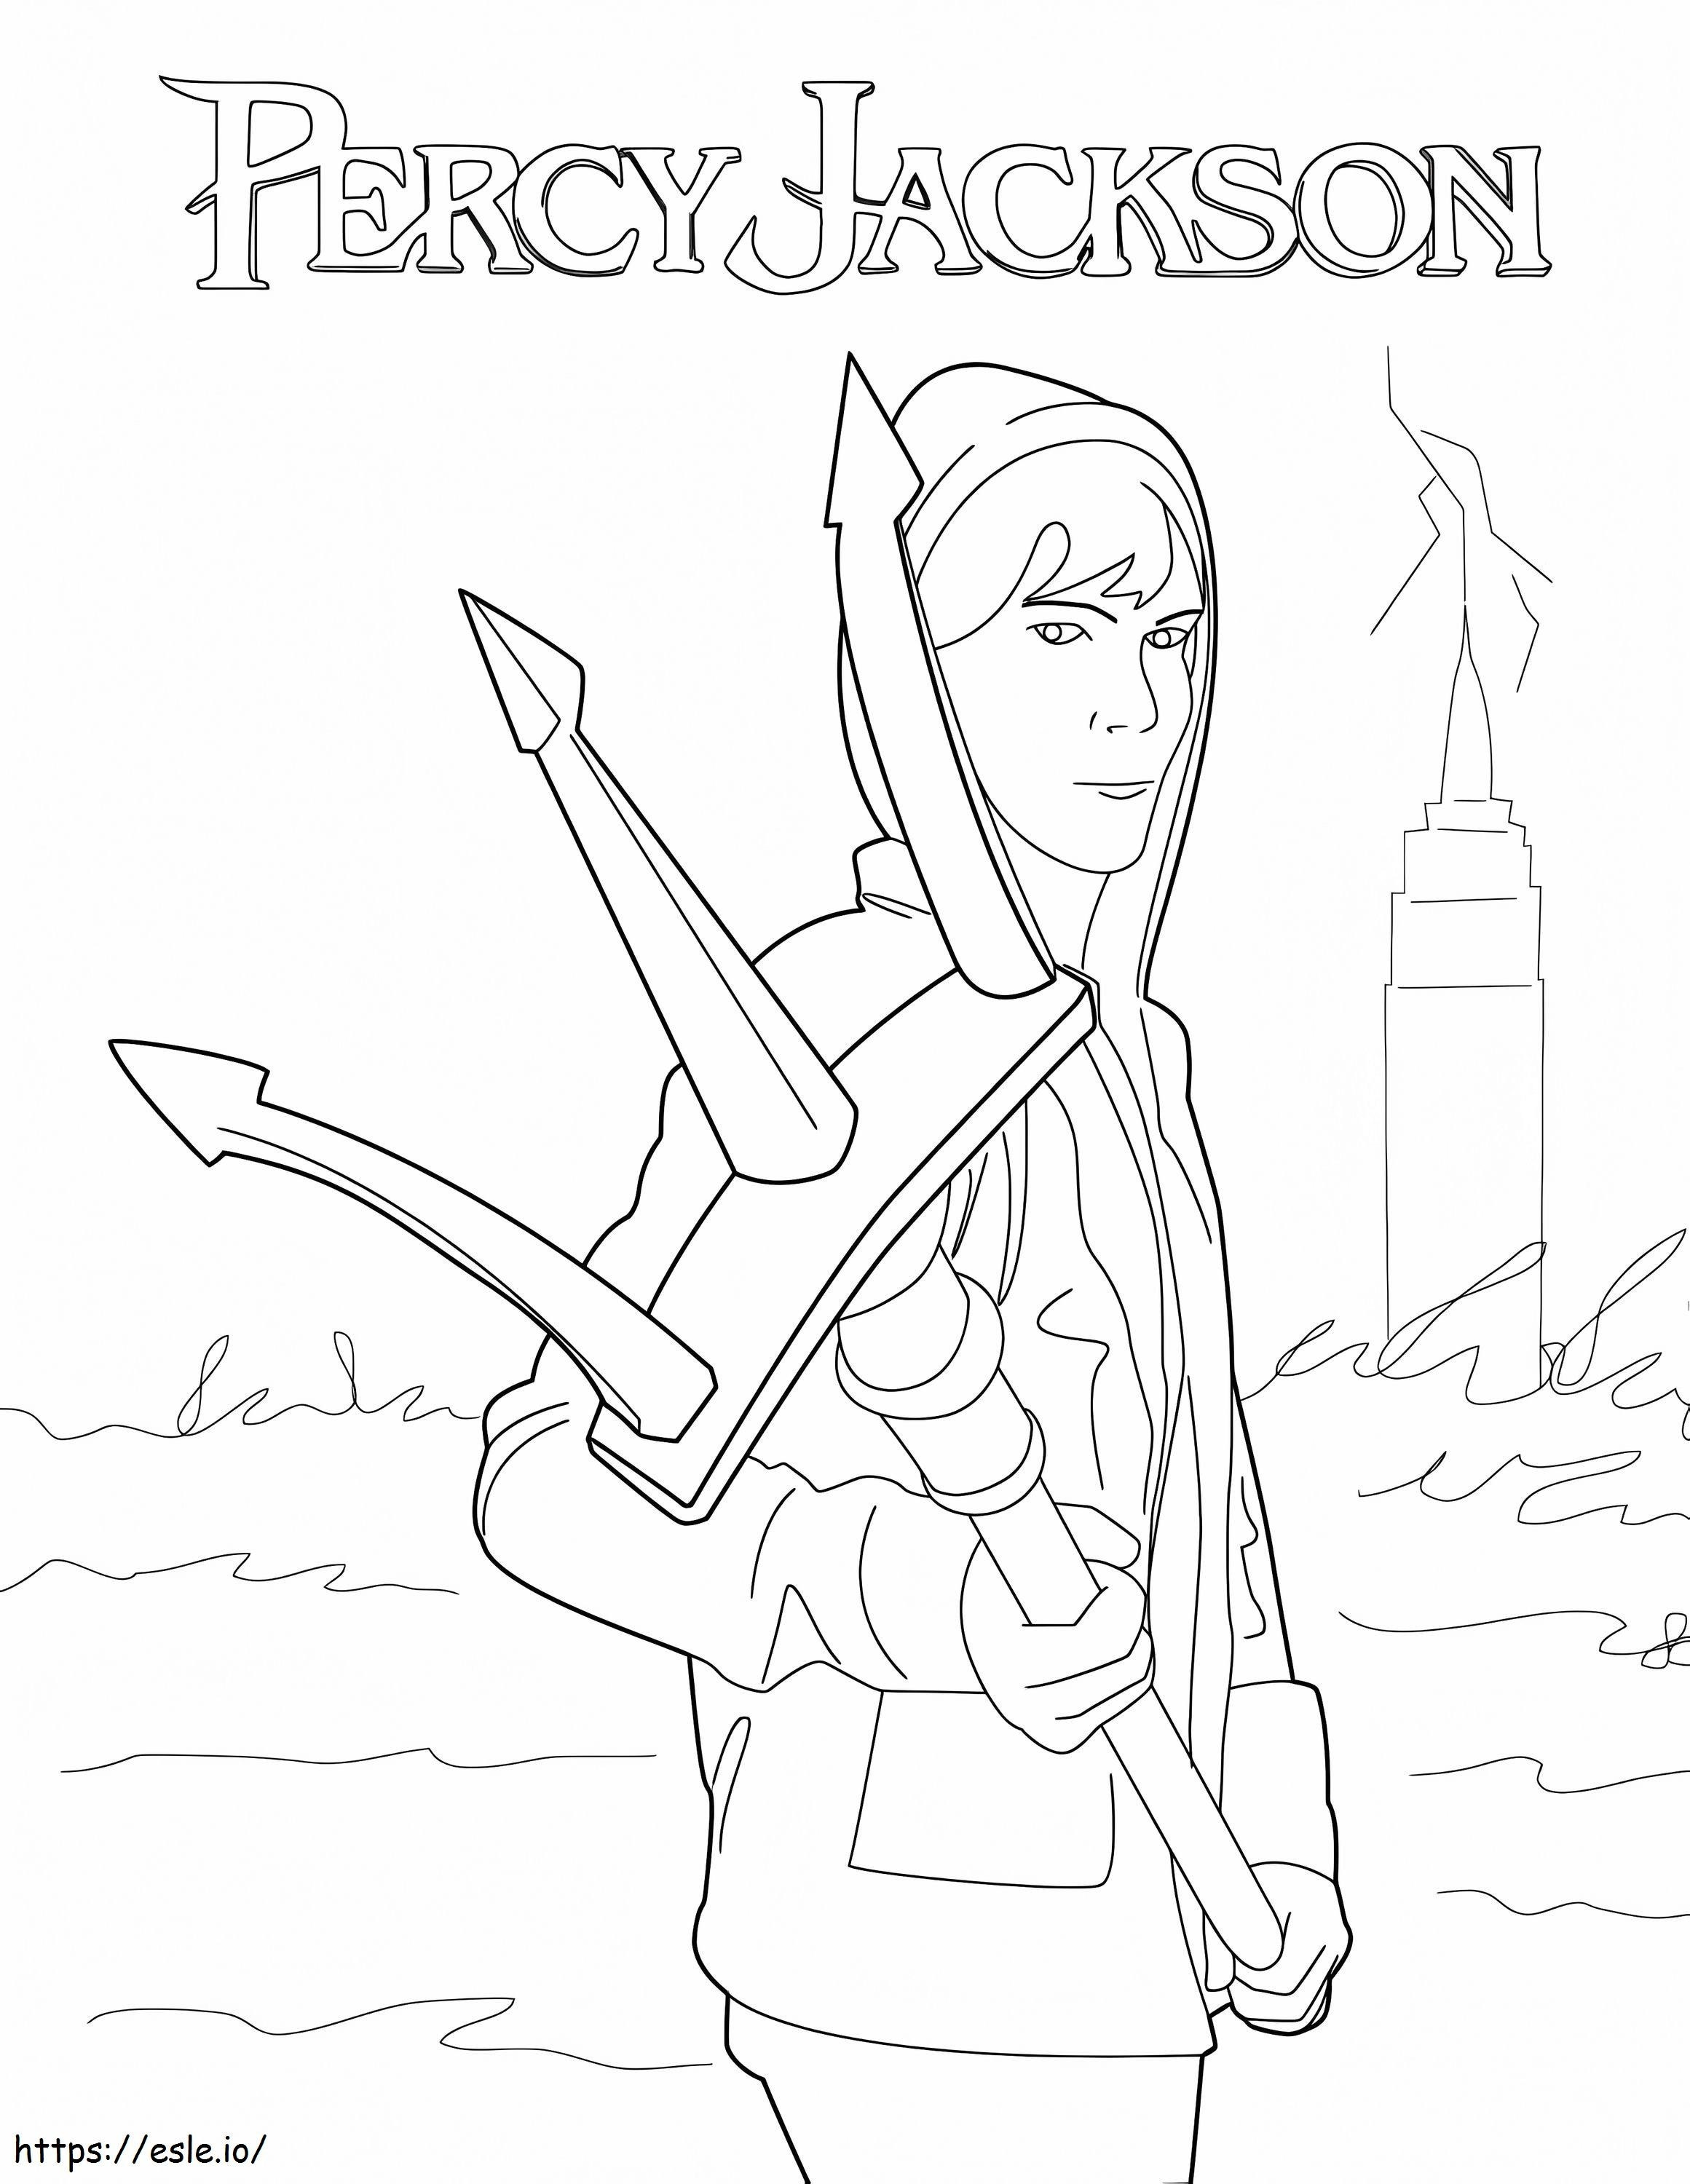 Percy Jackson 3 coloring page